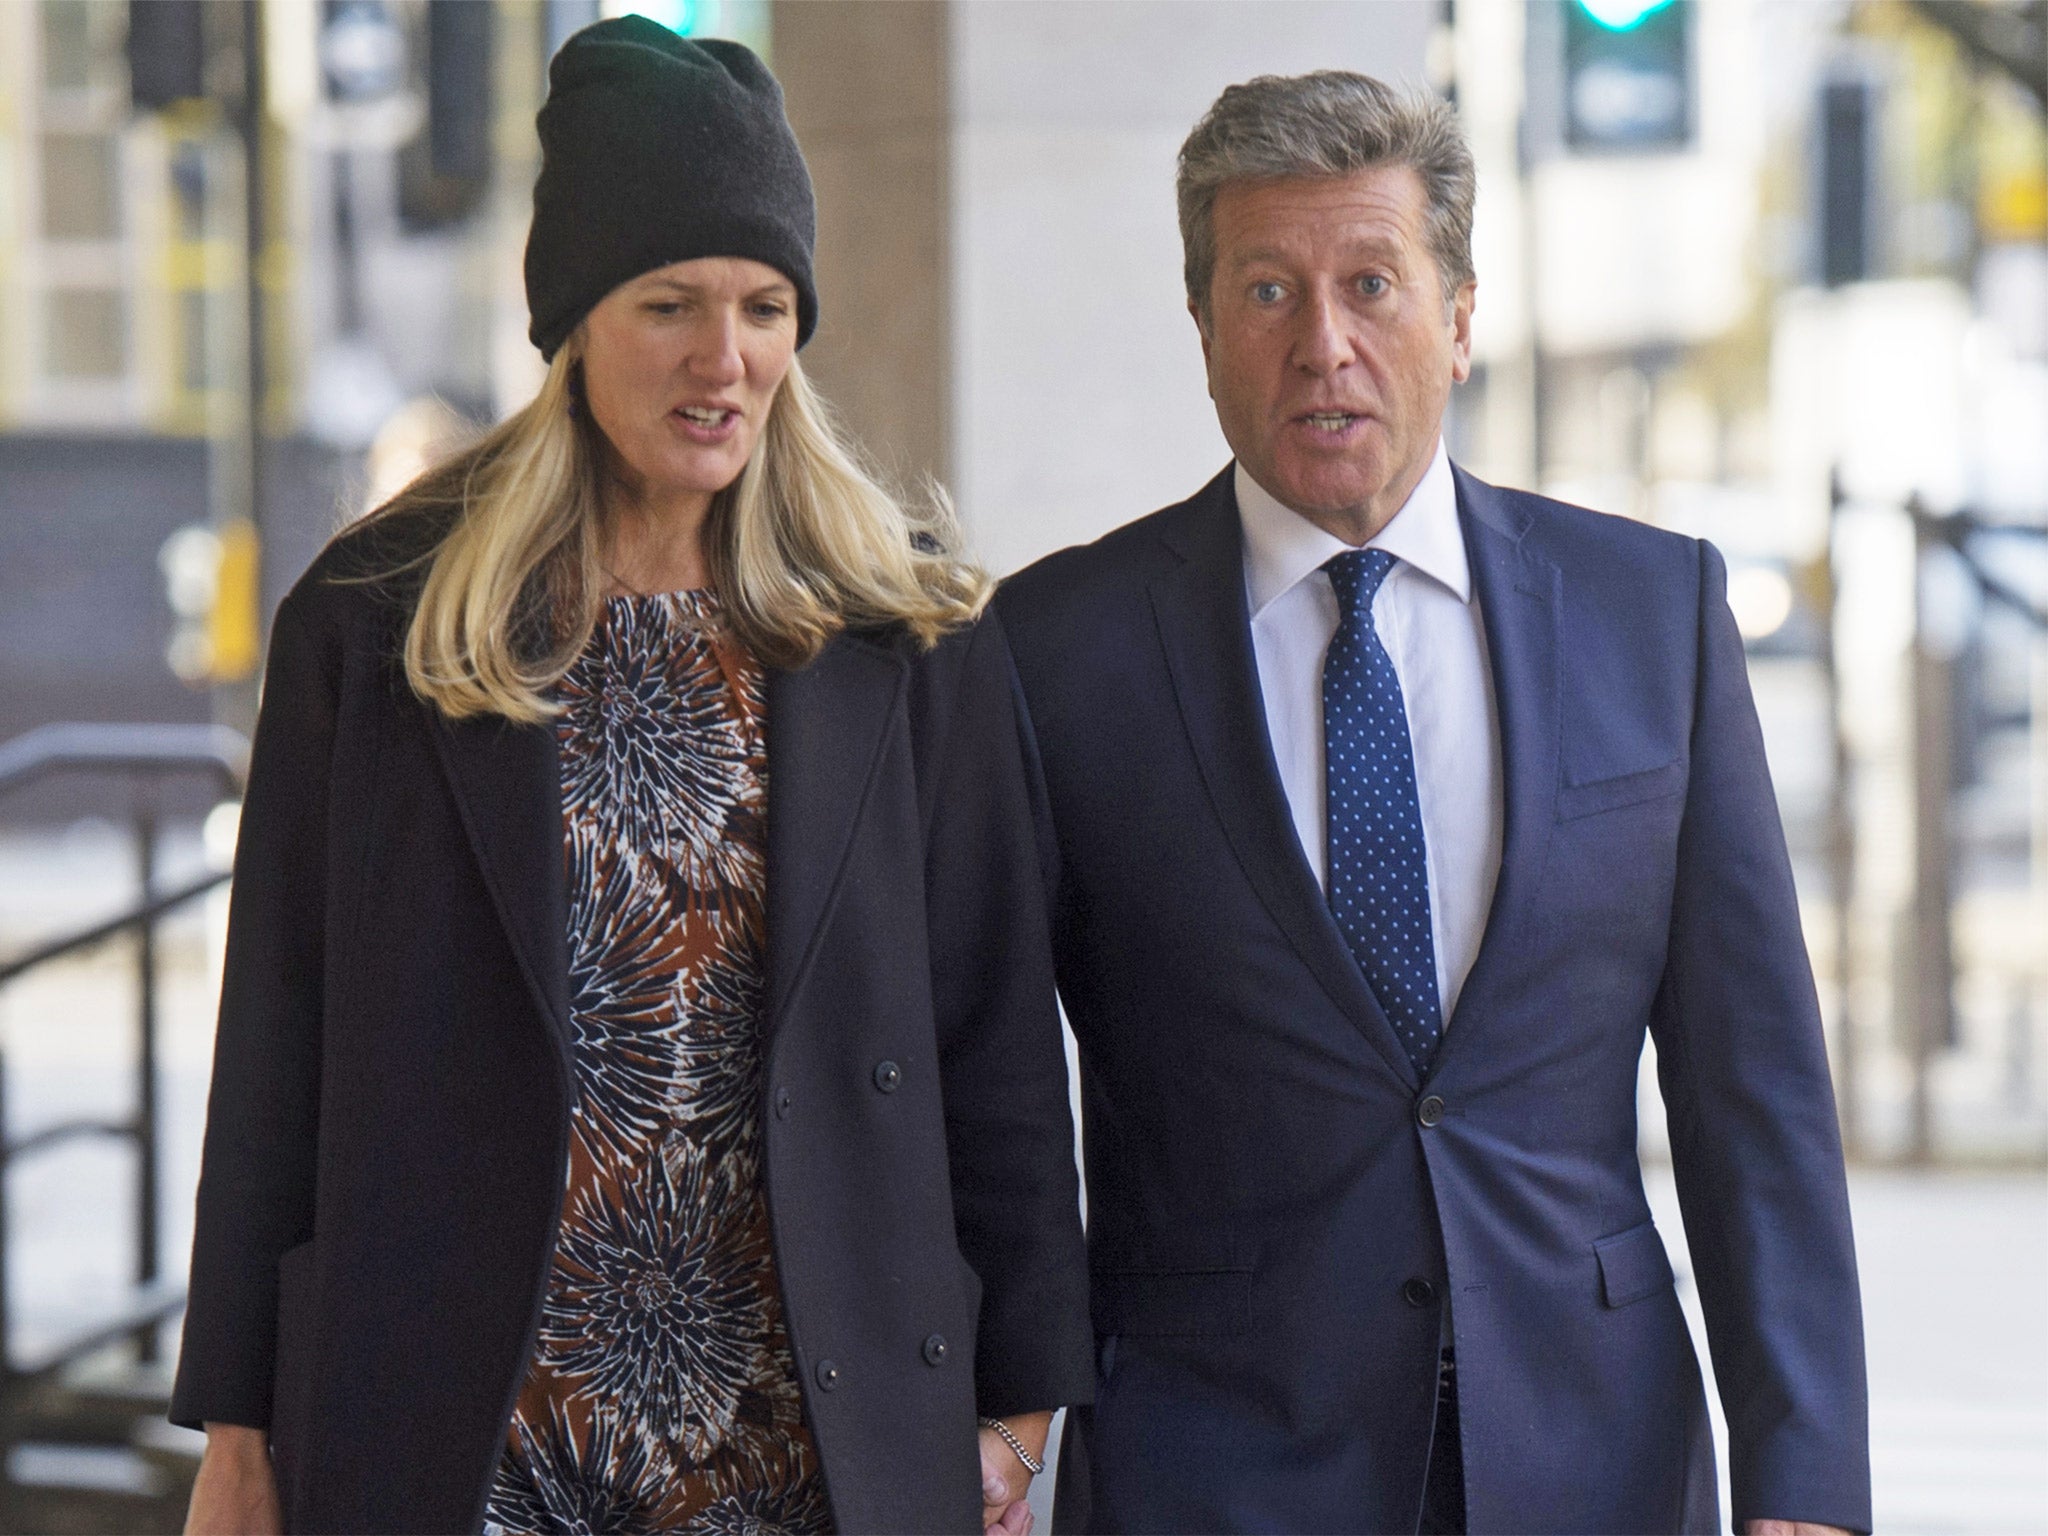 Neil Fox and his wife Vicky outside Westminster Magistrates Court. The DJ denies all charges